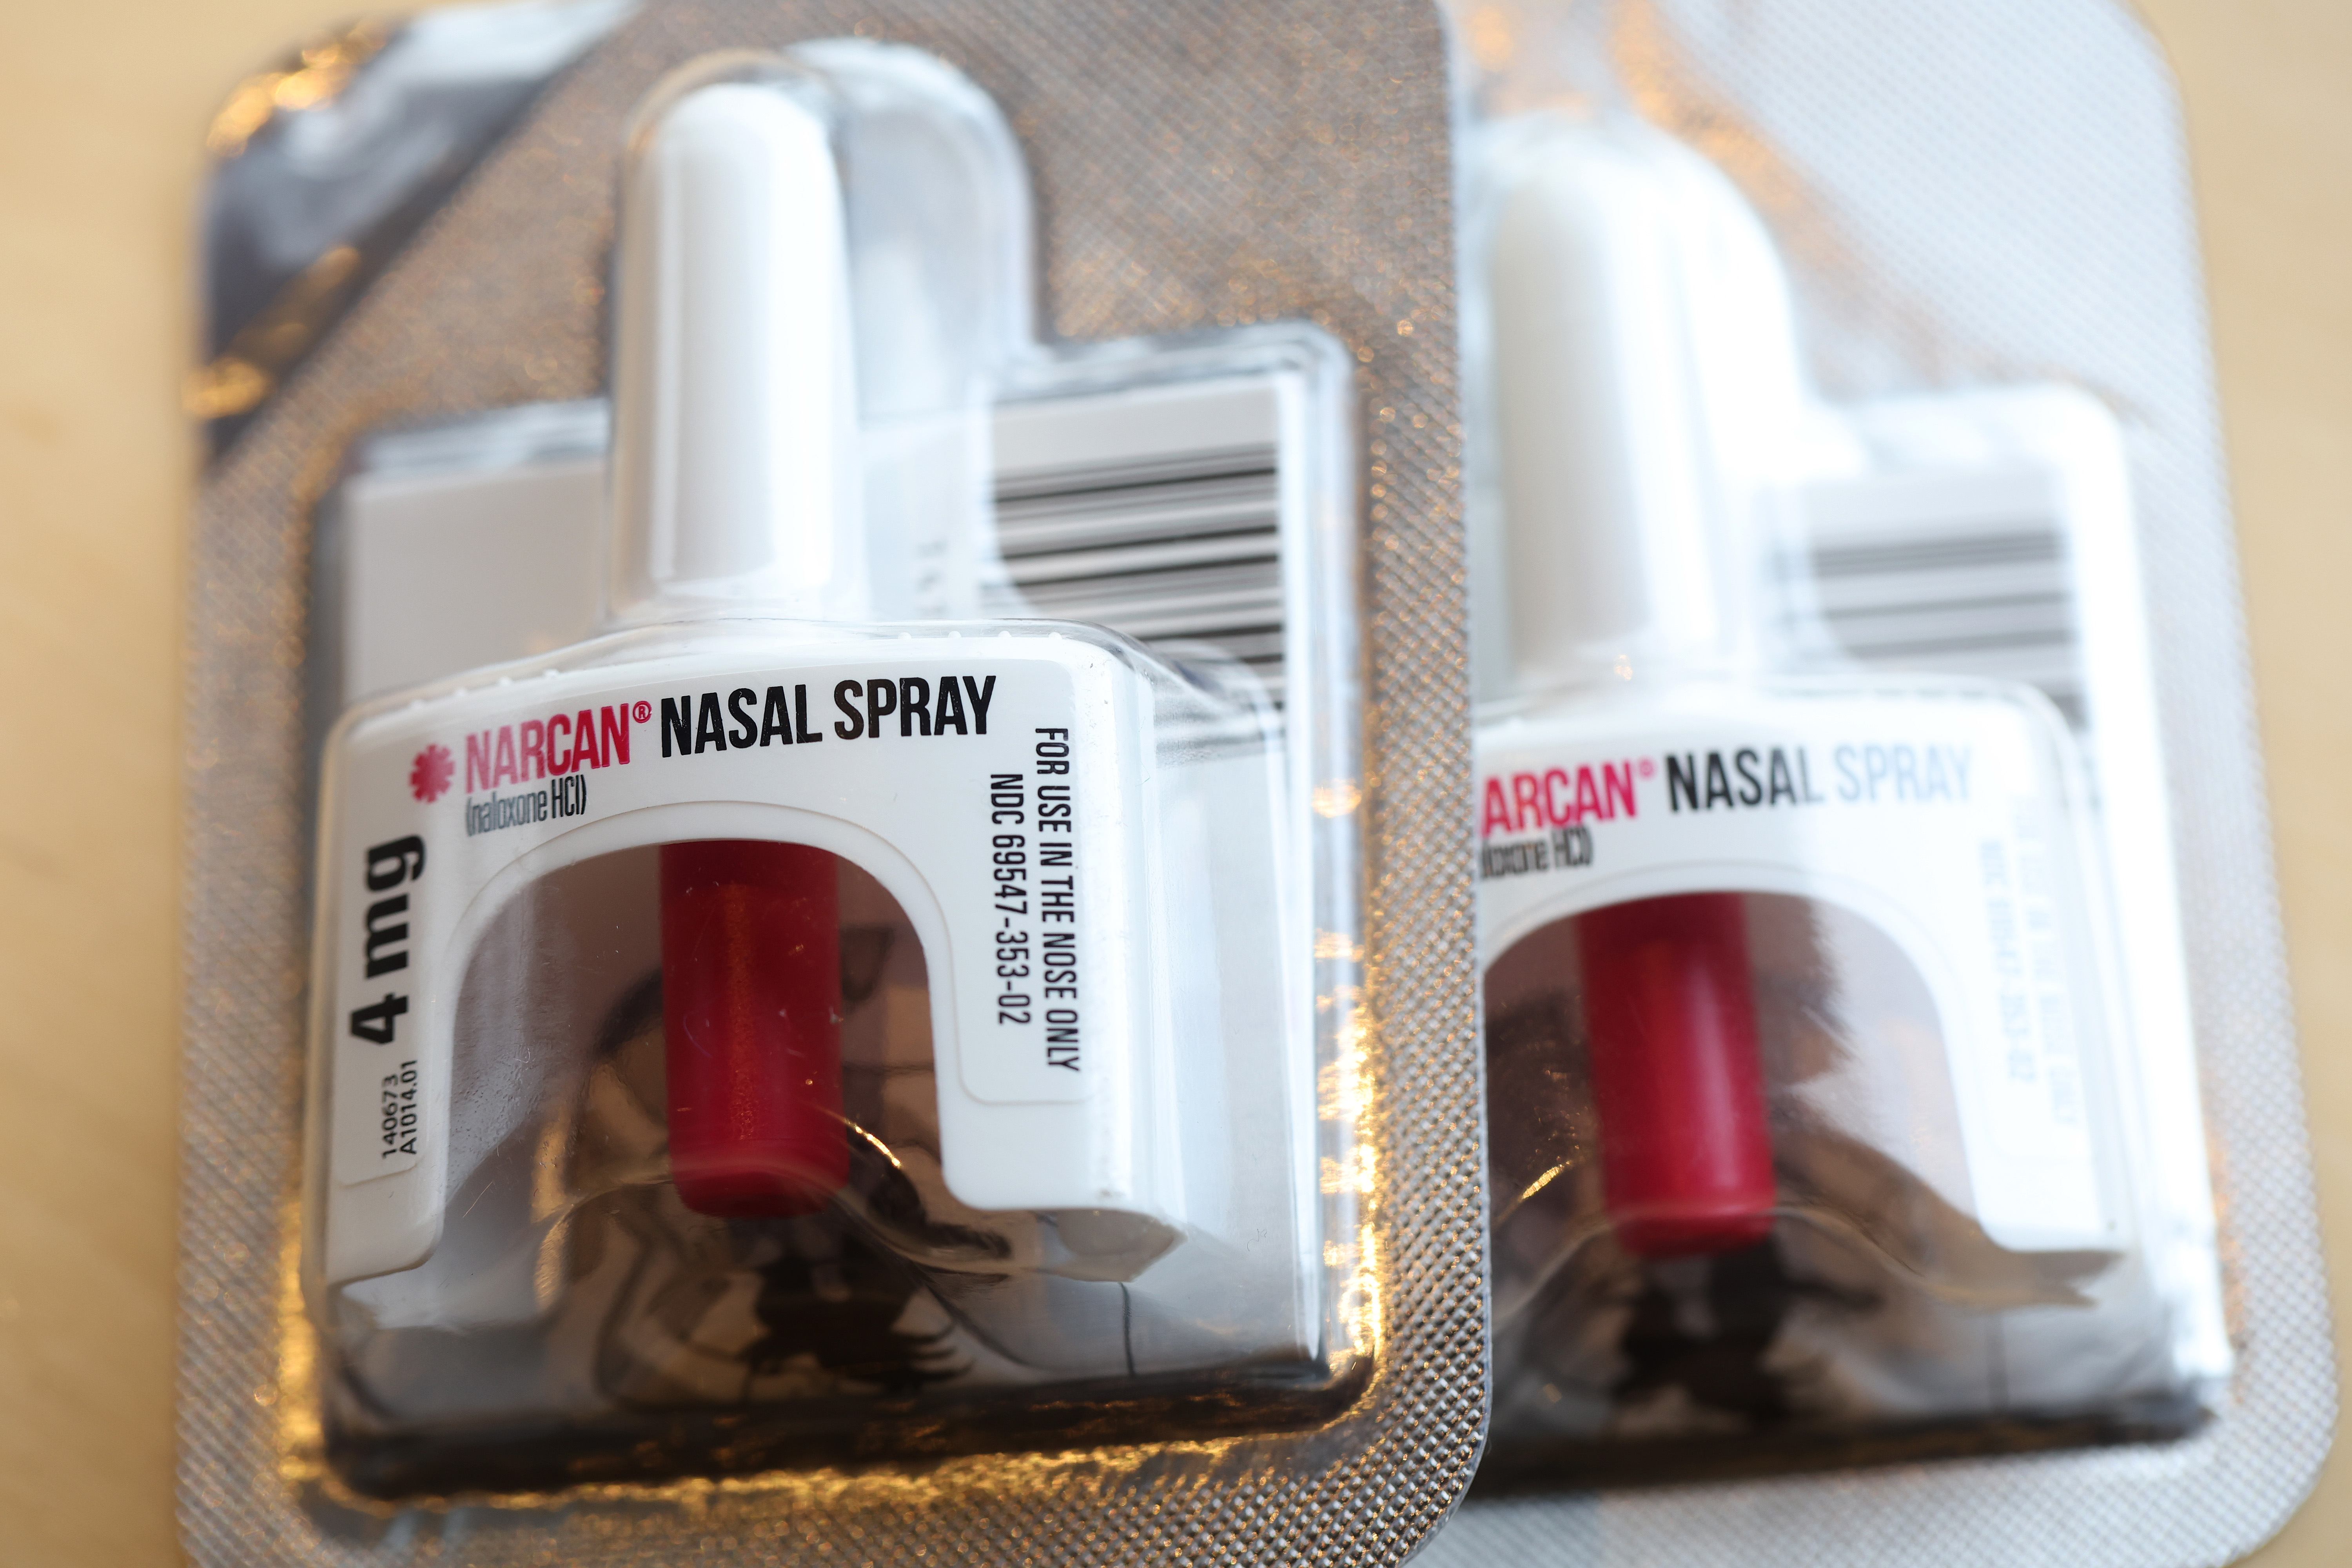 A photo of two spray plungers of the naloxone spray Narcan.